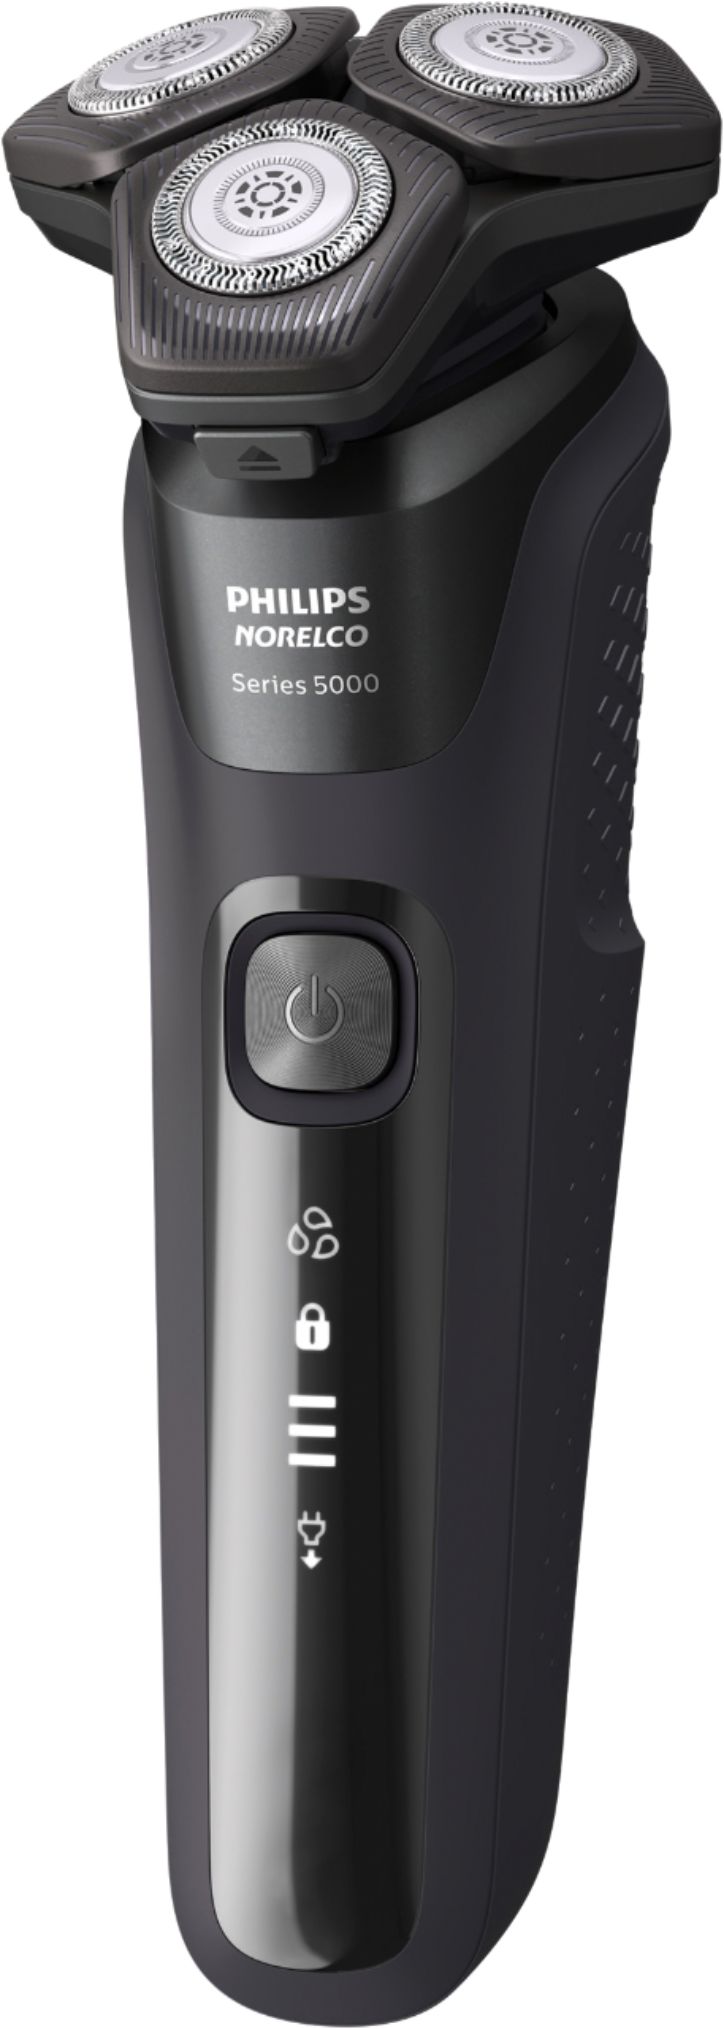 Philips Norelco Shaver 5300, Rechargeable Wet & Dry Shaver with Pop-Up  Trimmer Deep Black S5588/81 - Best Buy